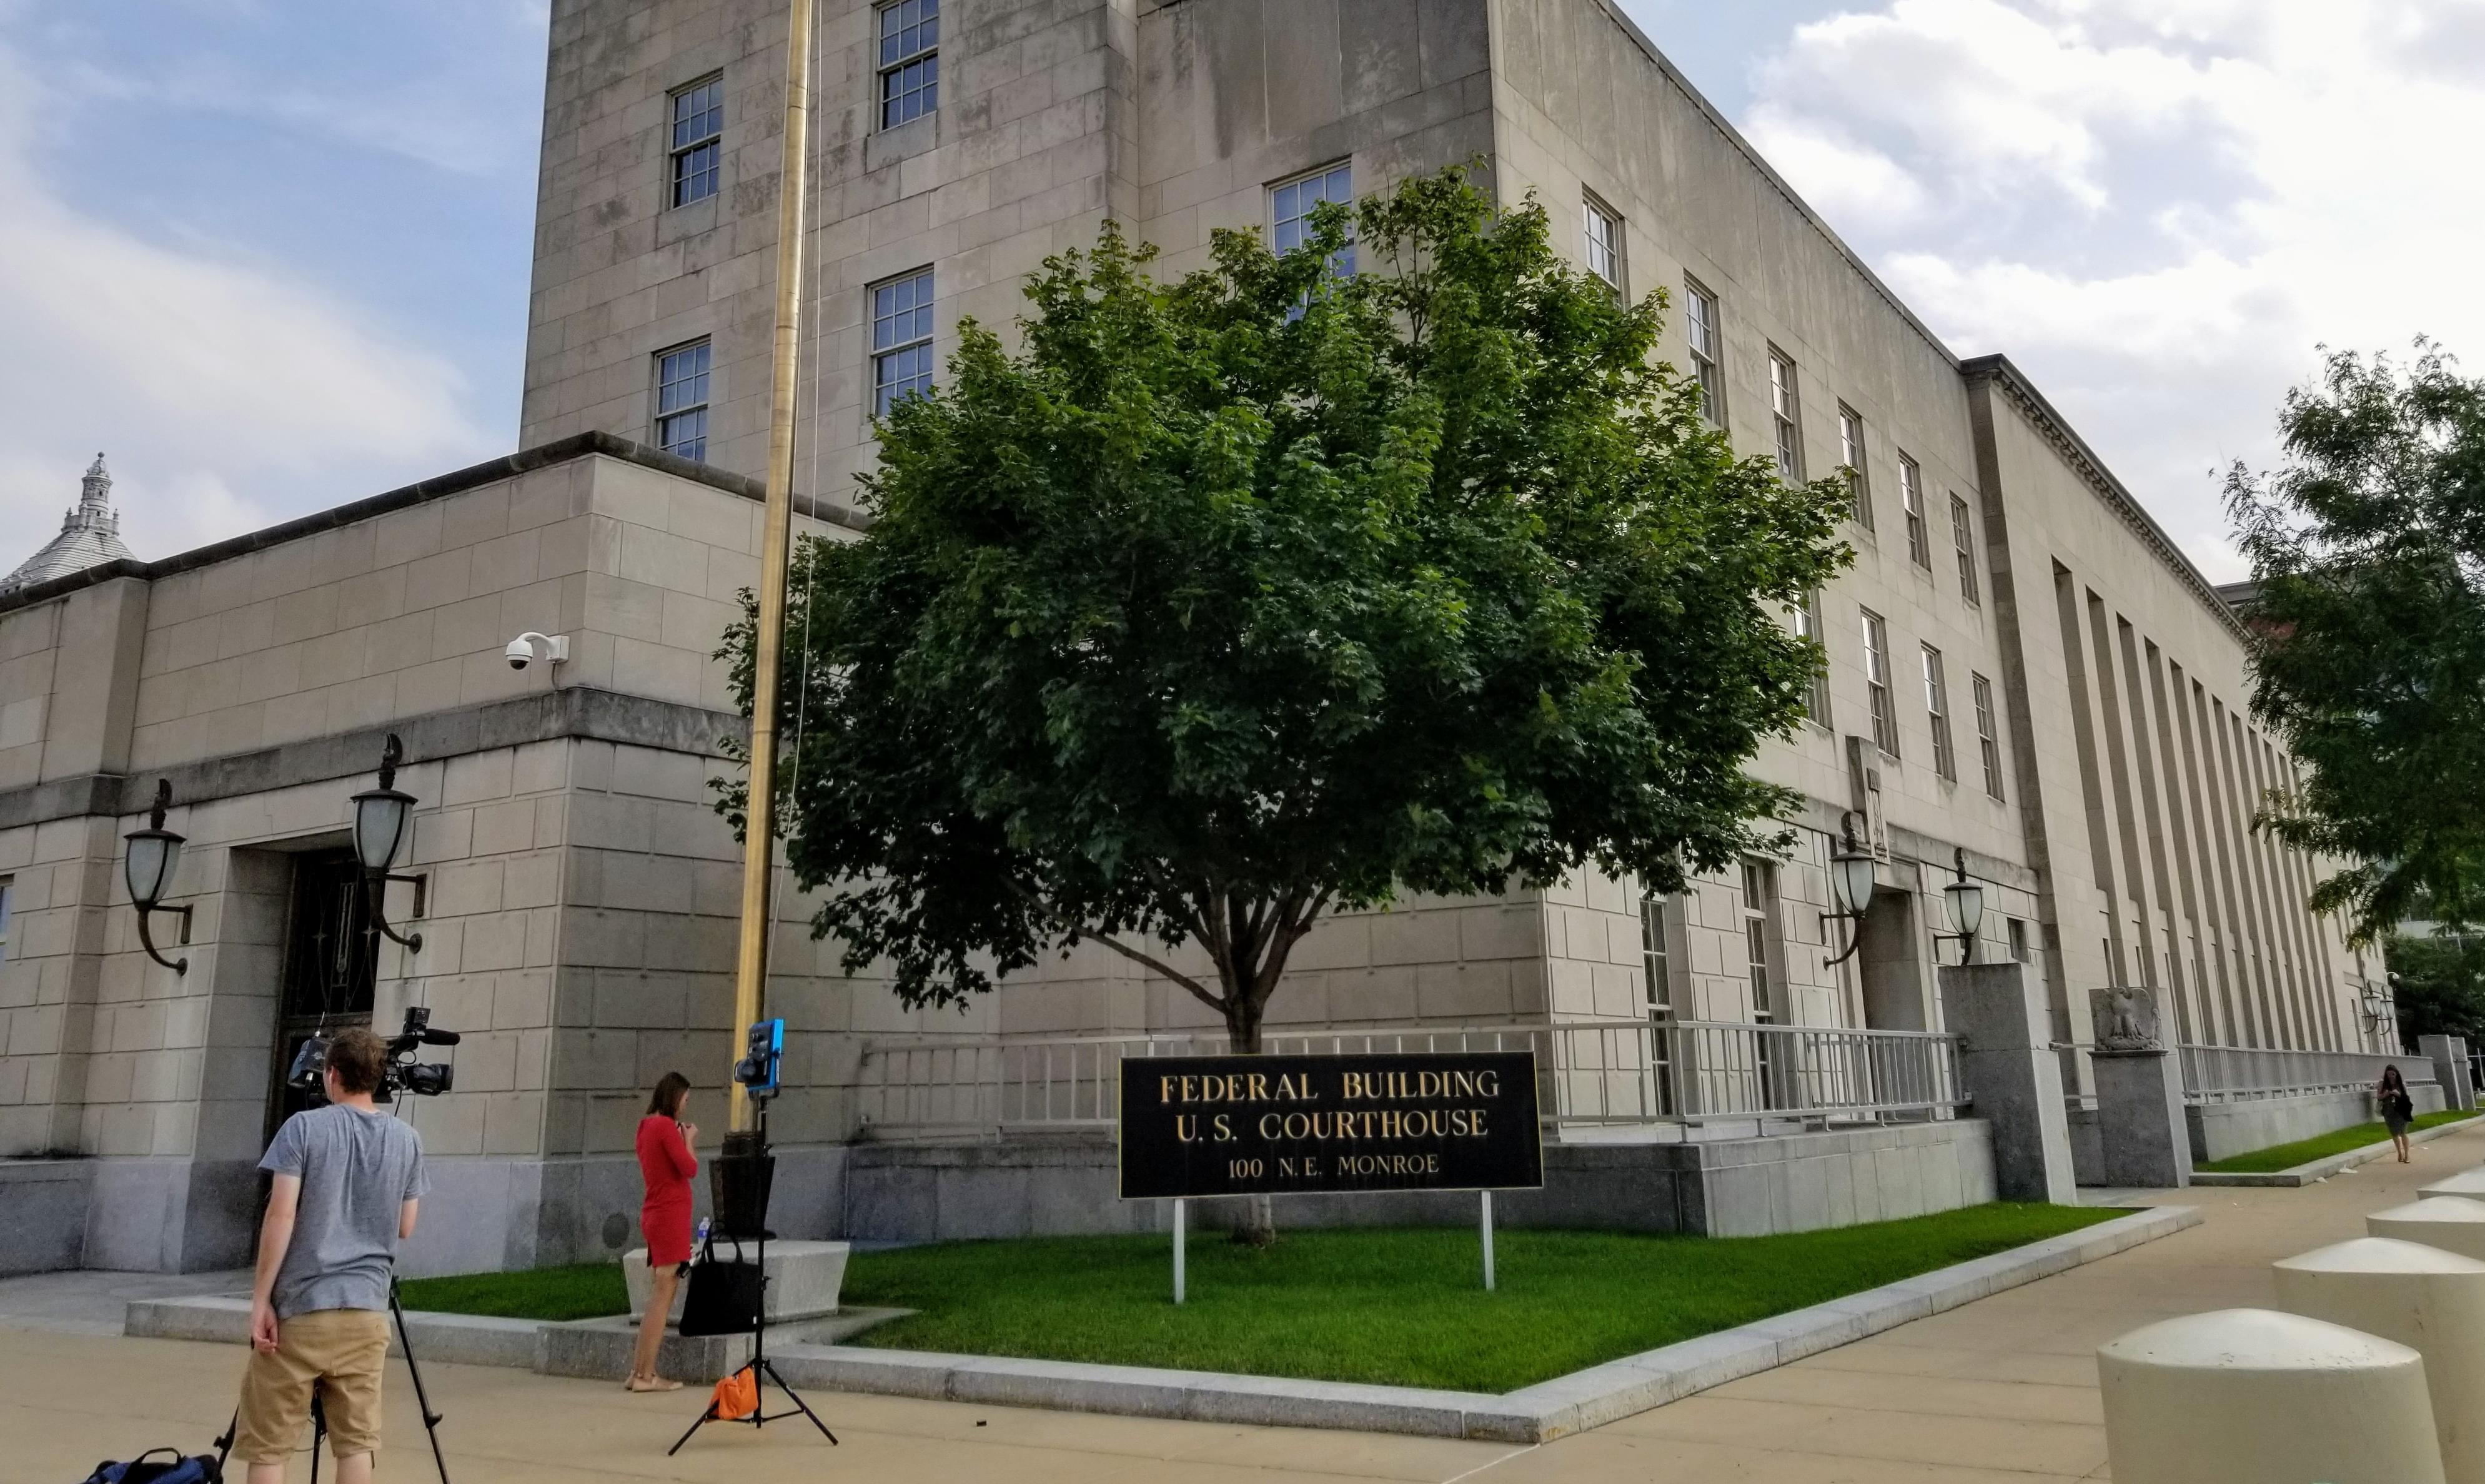 Federal Building & U.S. Courthouse in Peoria.